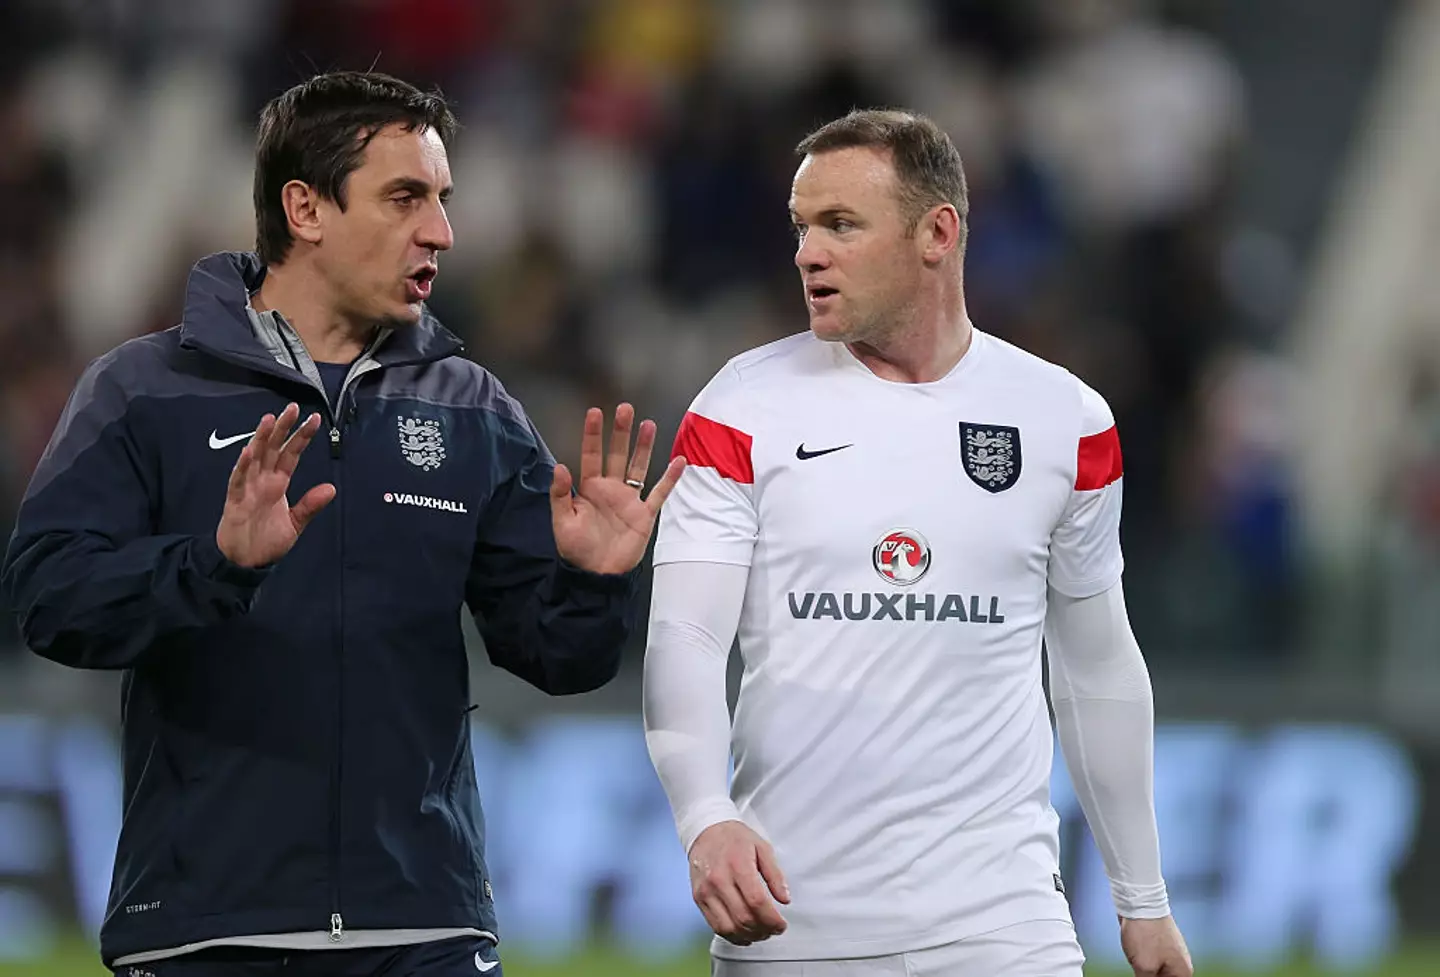 Rooney and Neville played together for Manchester United and England (Image: Getty)